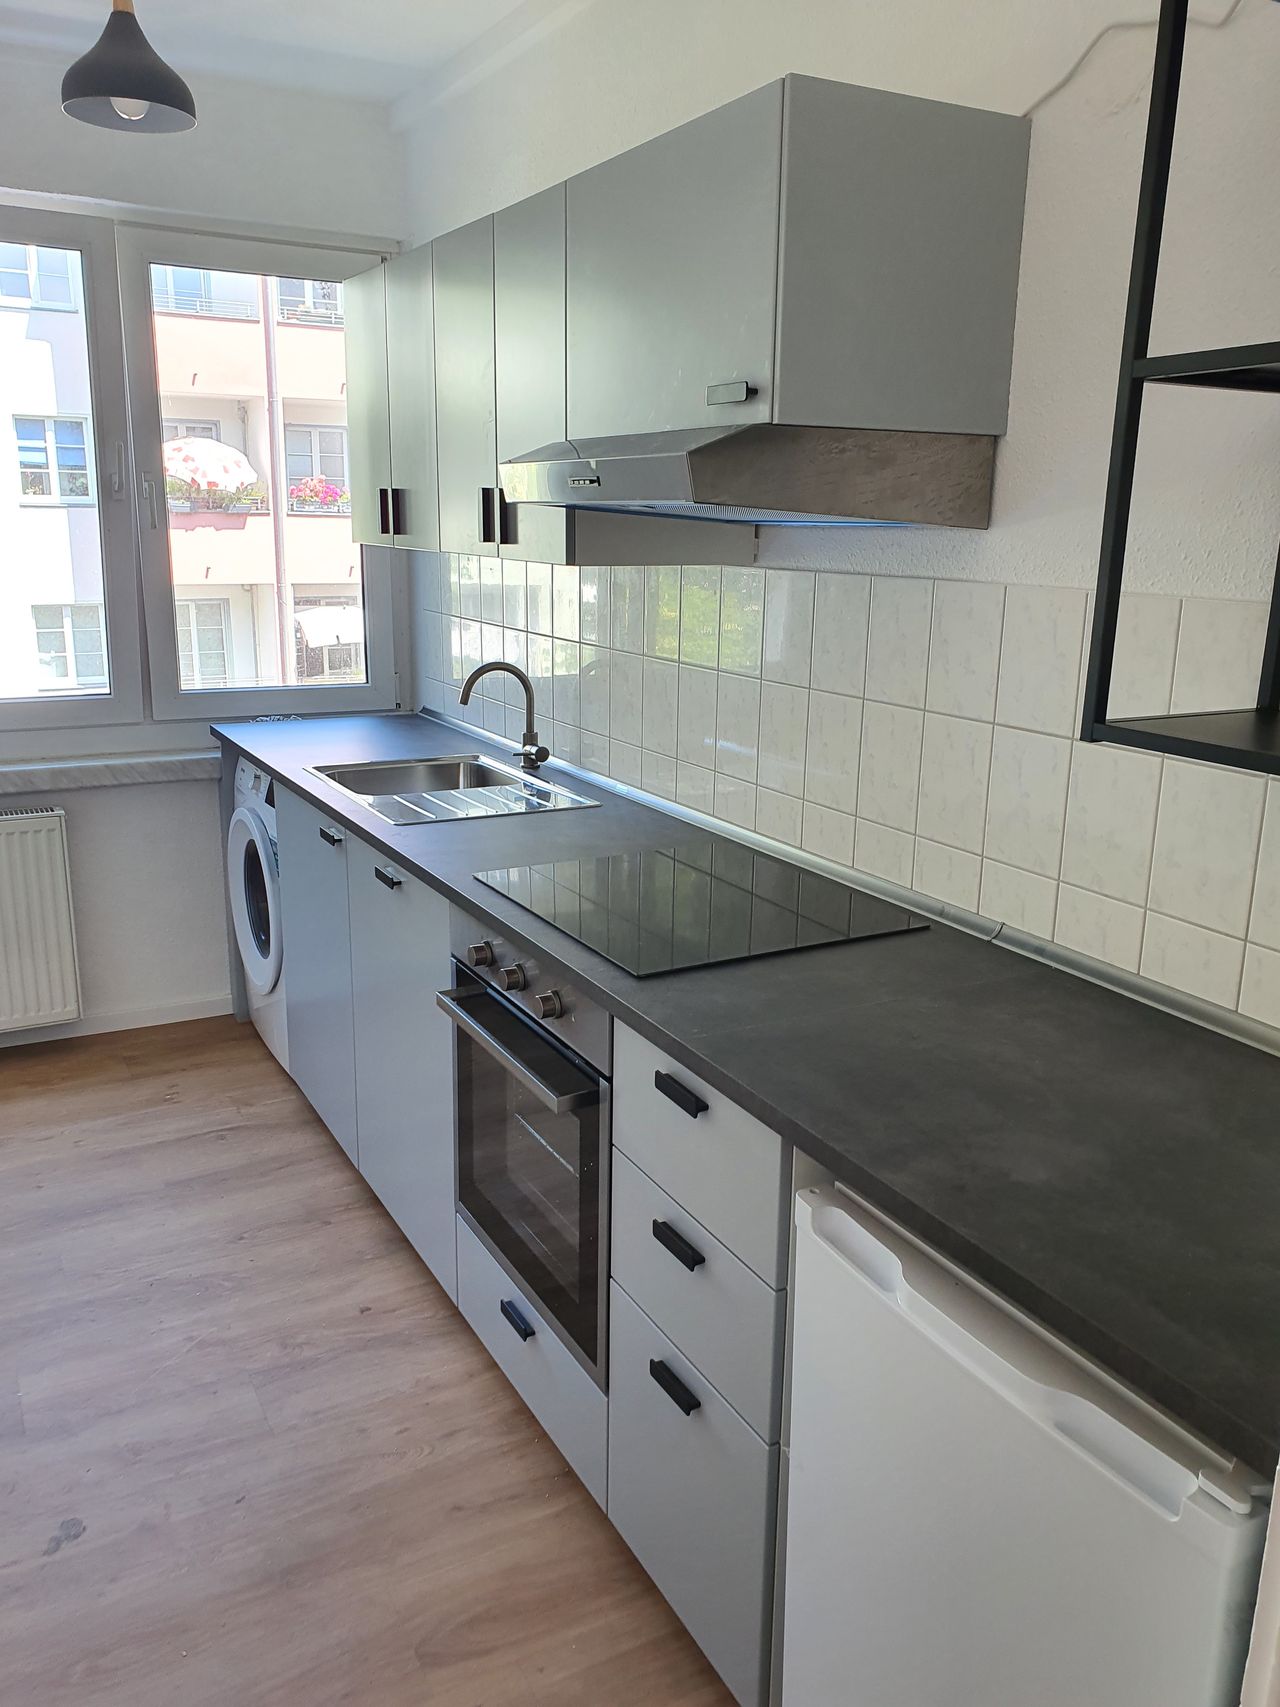 'GEORG' - practical 2-room apartment near the river Spree